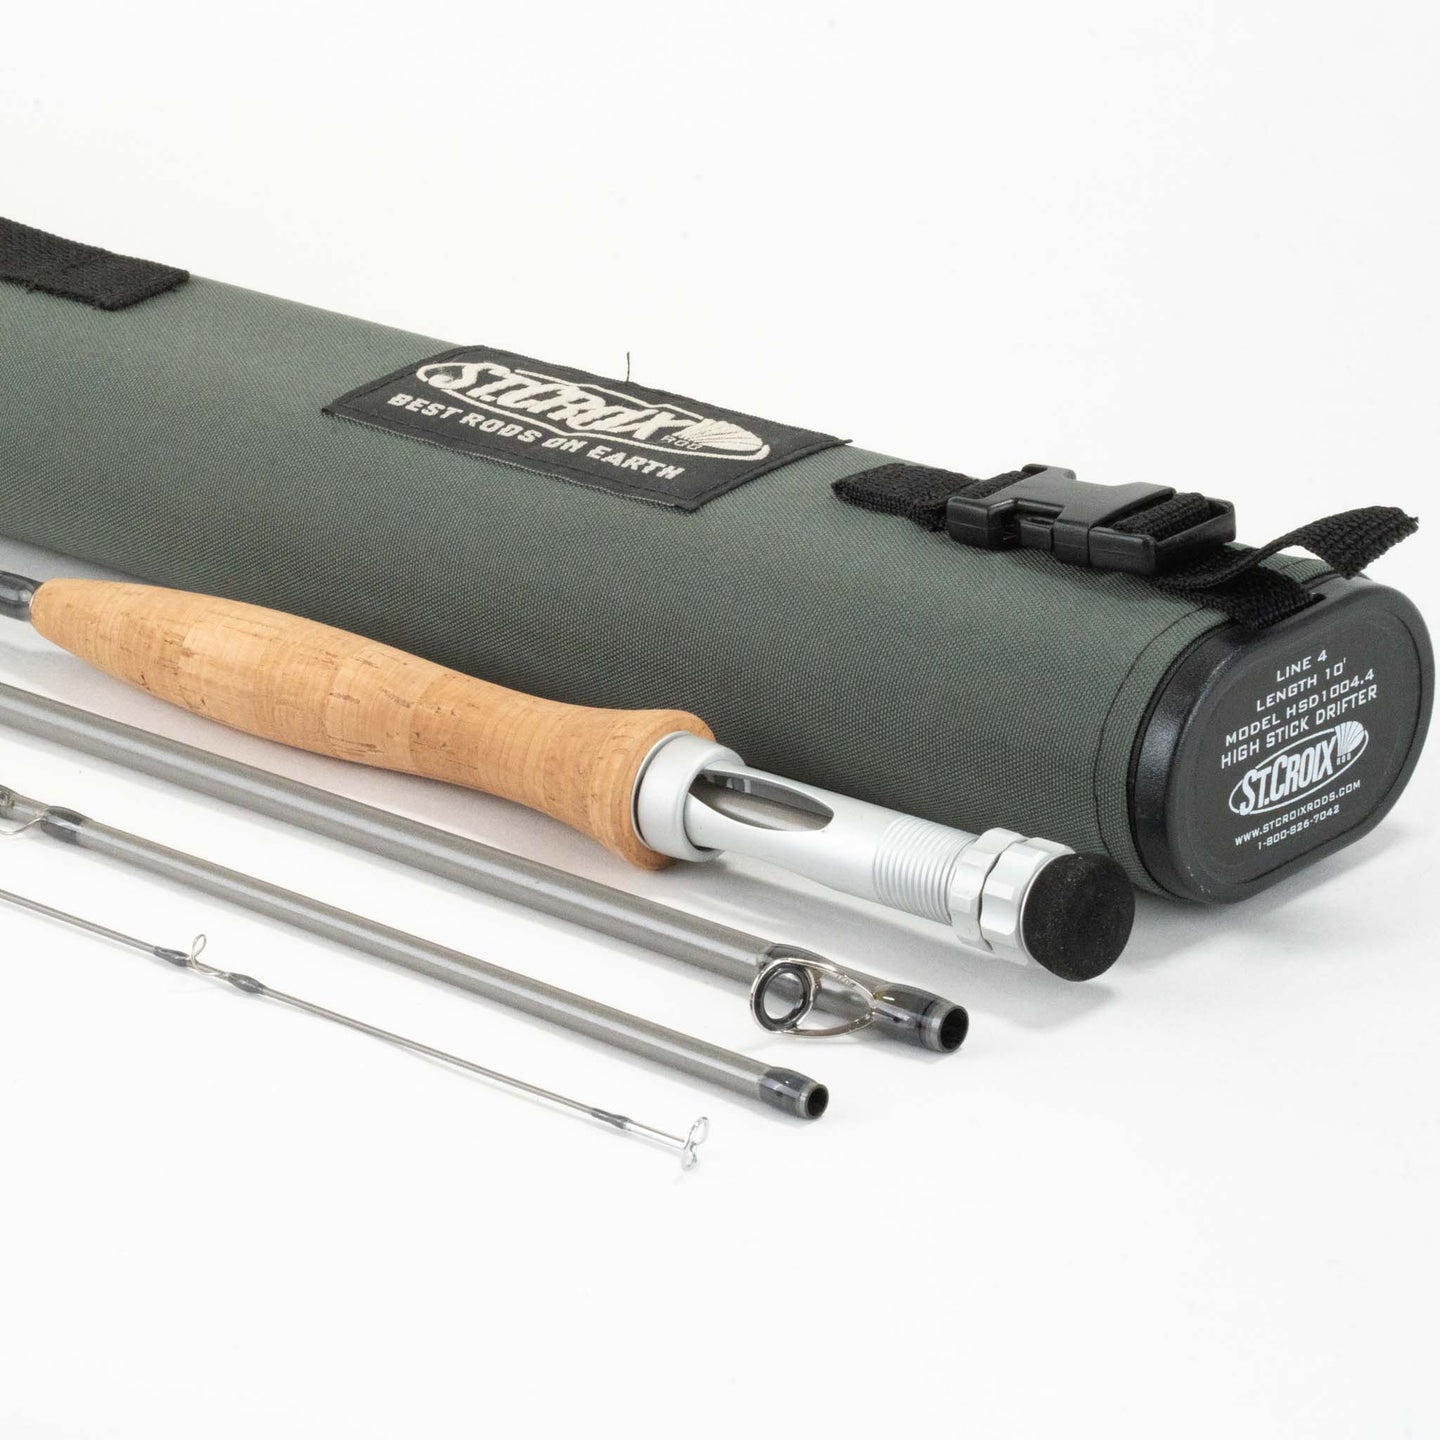 St Croix High Stick Drifter 4100-4 Fly Rod - 4wt 10ft 0in 4pc